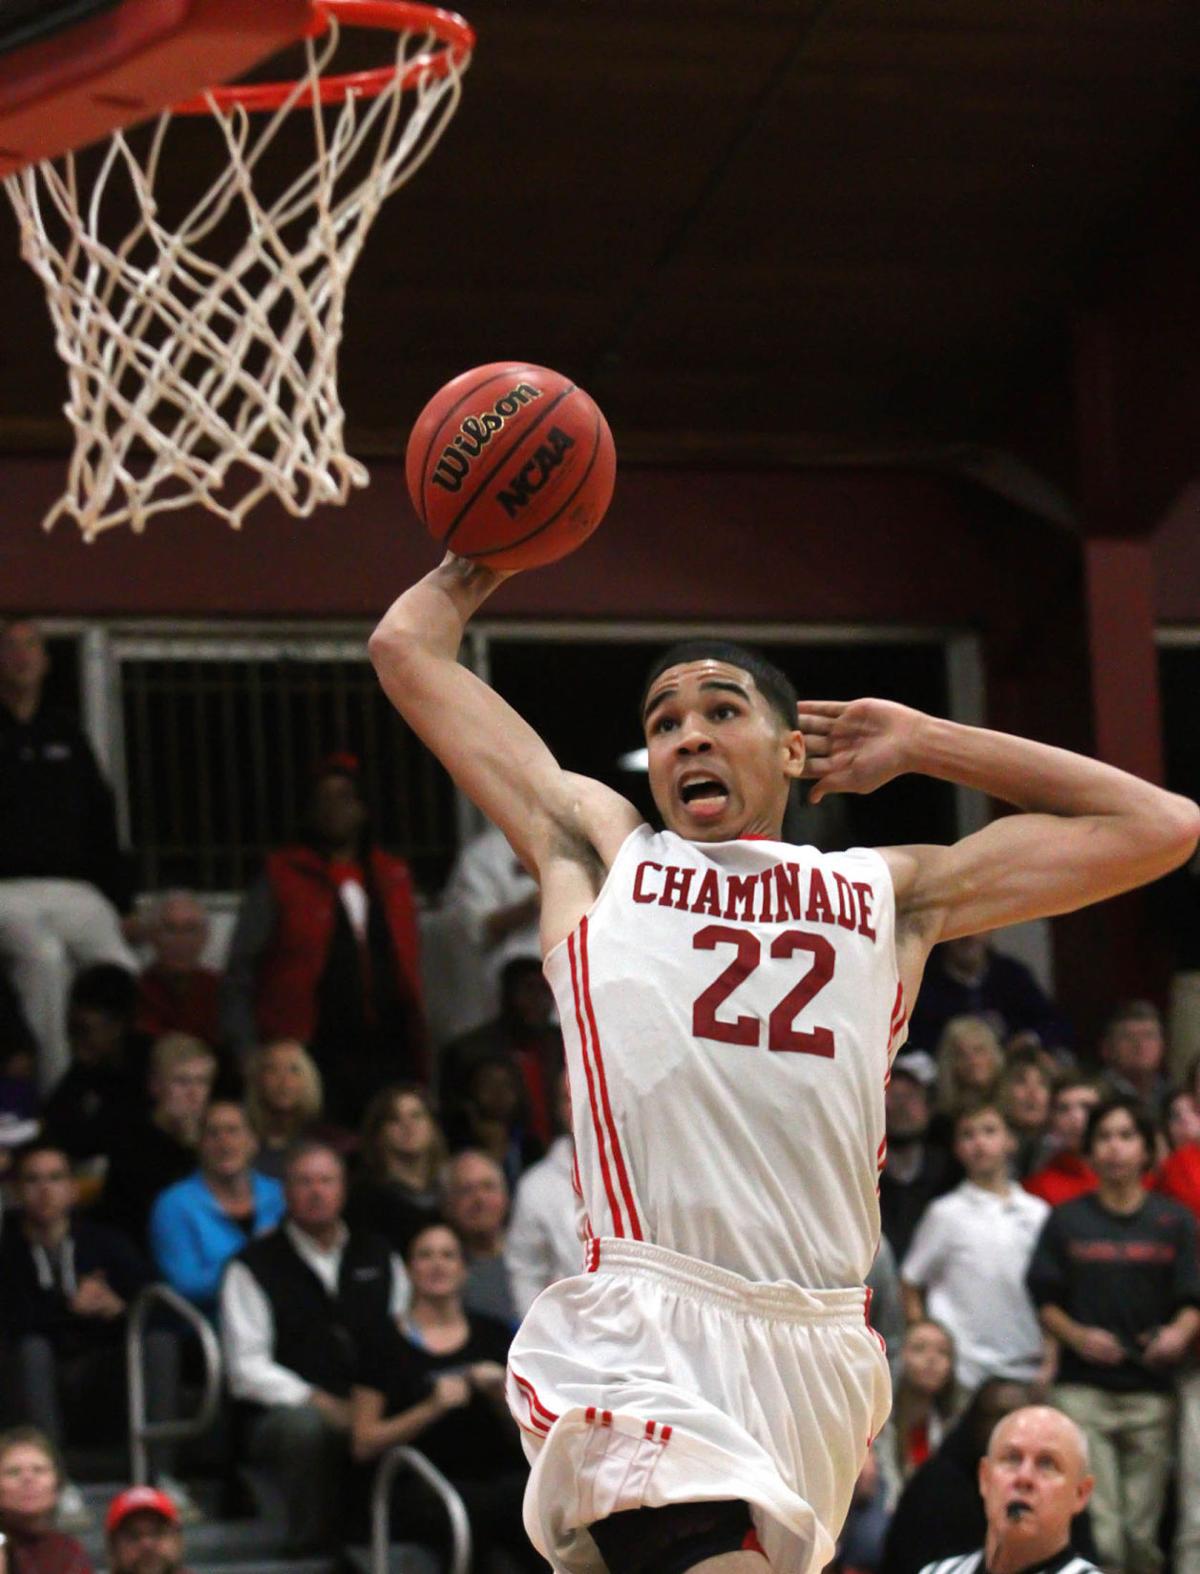 Chaminade blows out rival CBC before packed house | Boys ...